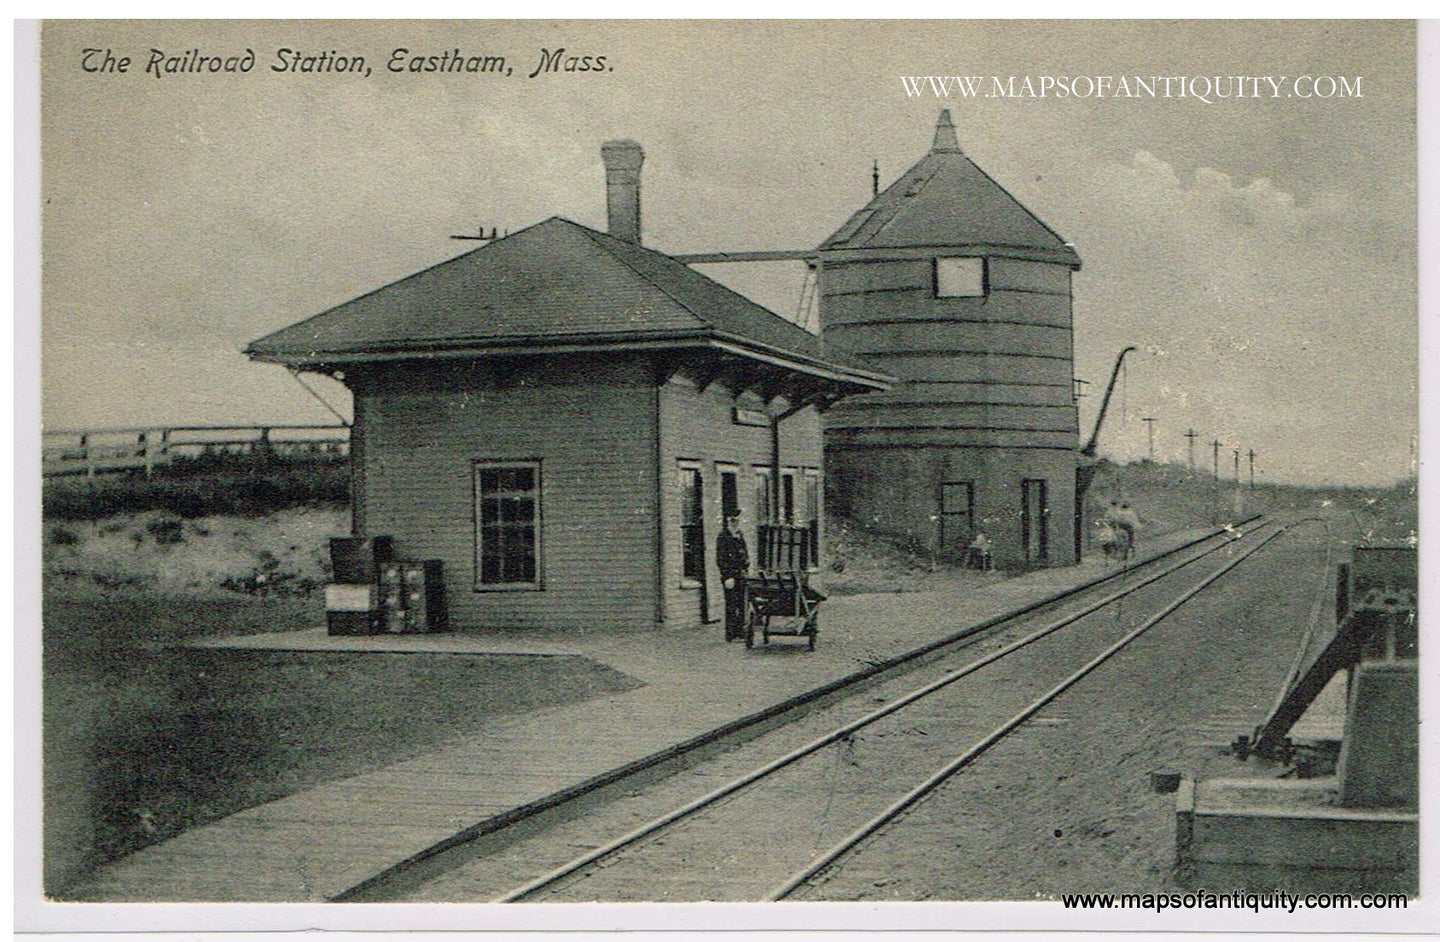 Antique-Black-and-White-Post-Card-The-Railroad-Station-Eastham-Mass---Postcard-****-Postcard-Cape-Cod-and-Islands-1907-1914-Provincetown-Advocate-Maps-Of-Antiquity